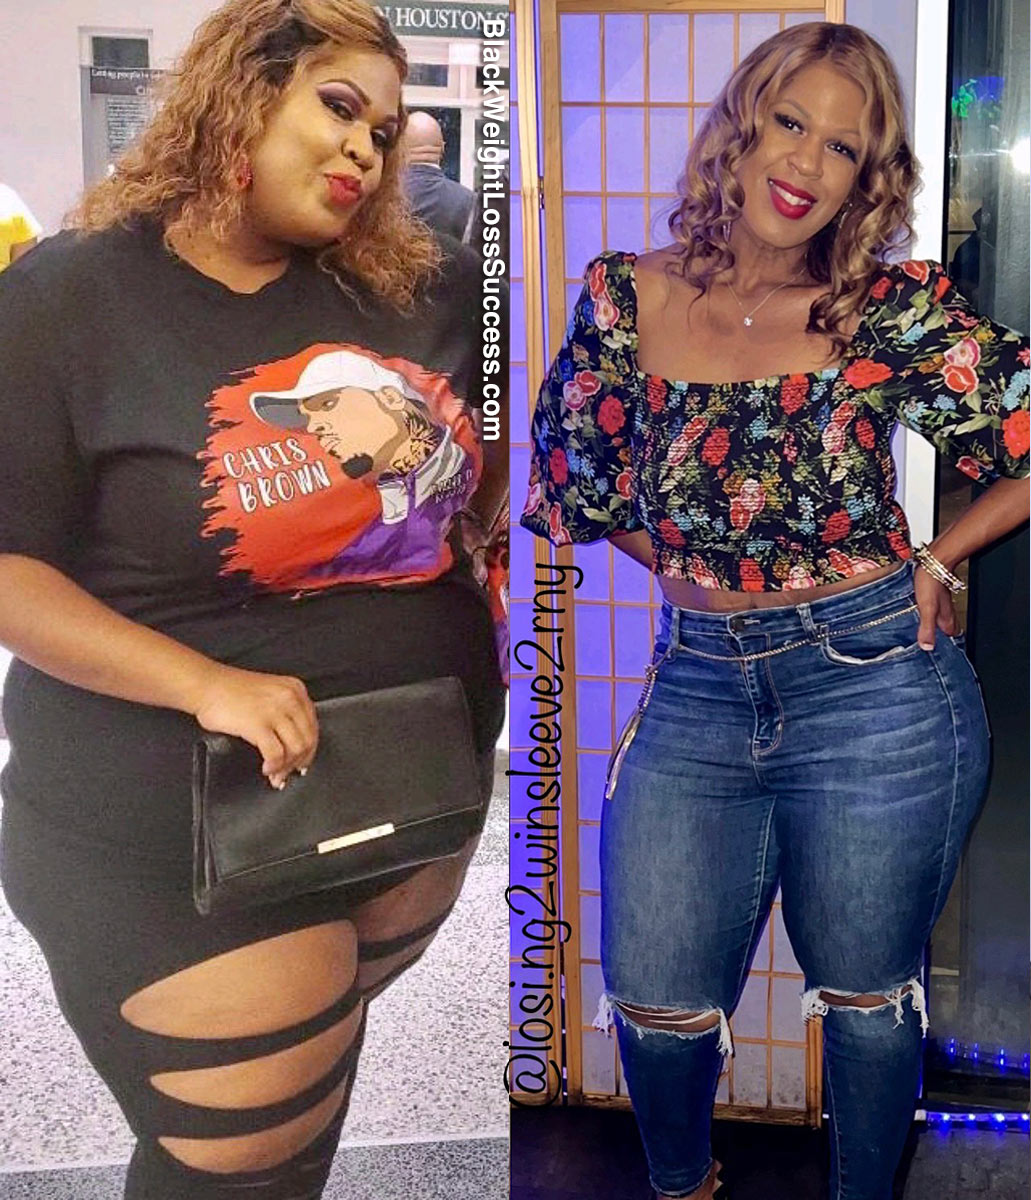 Kwyonnica lost 220 pounds